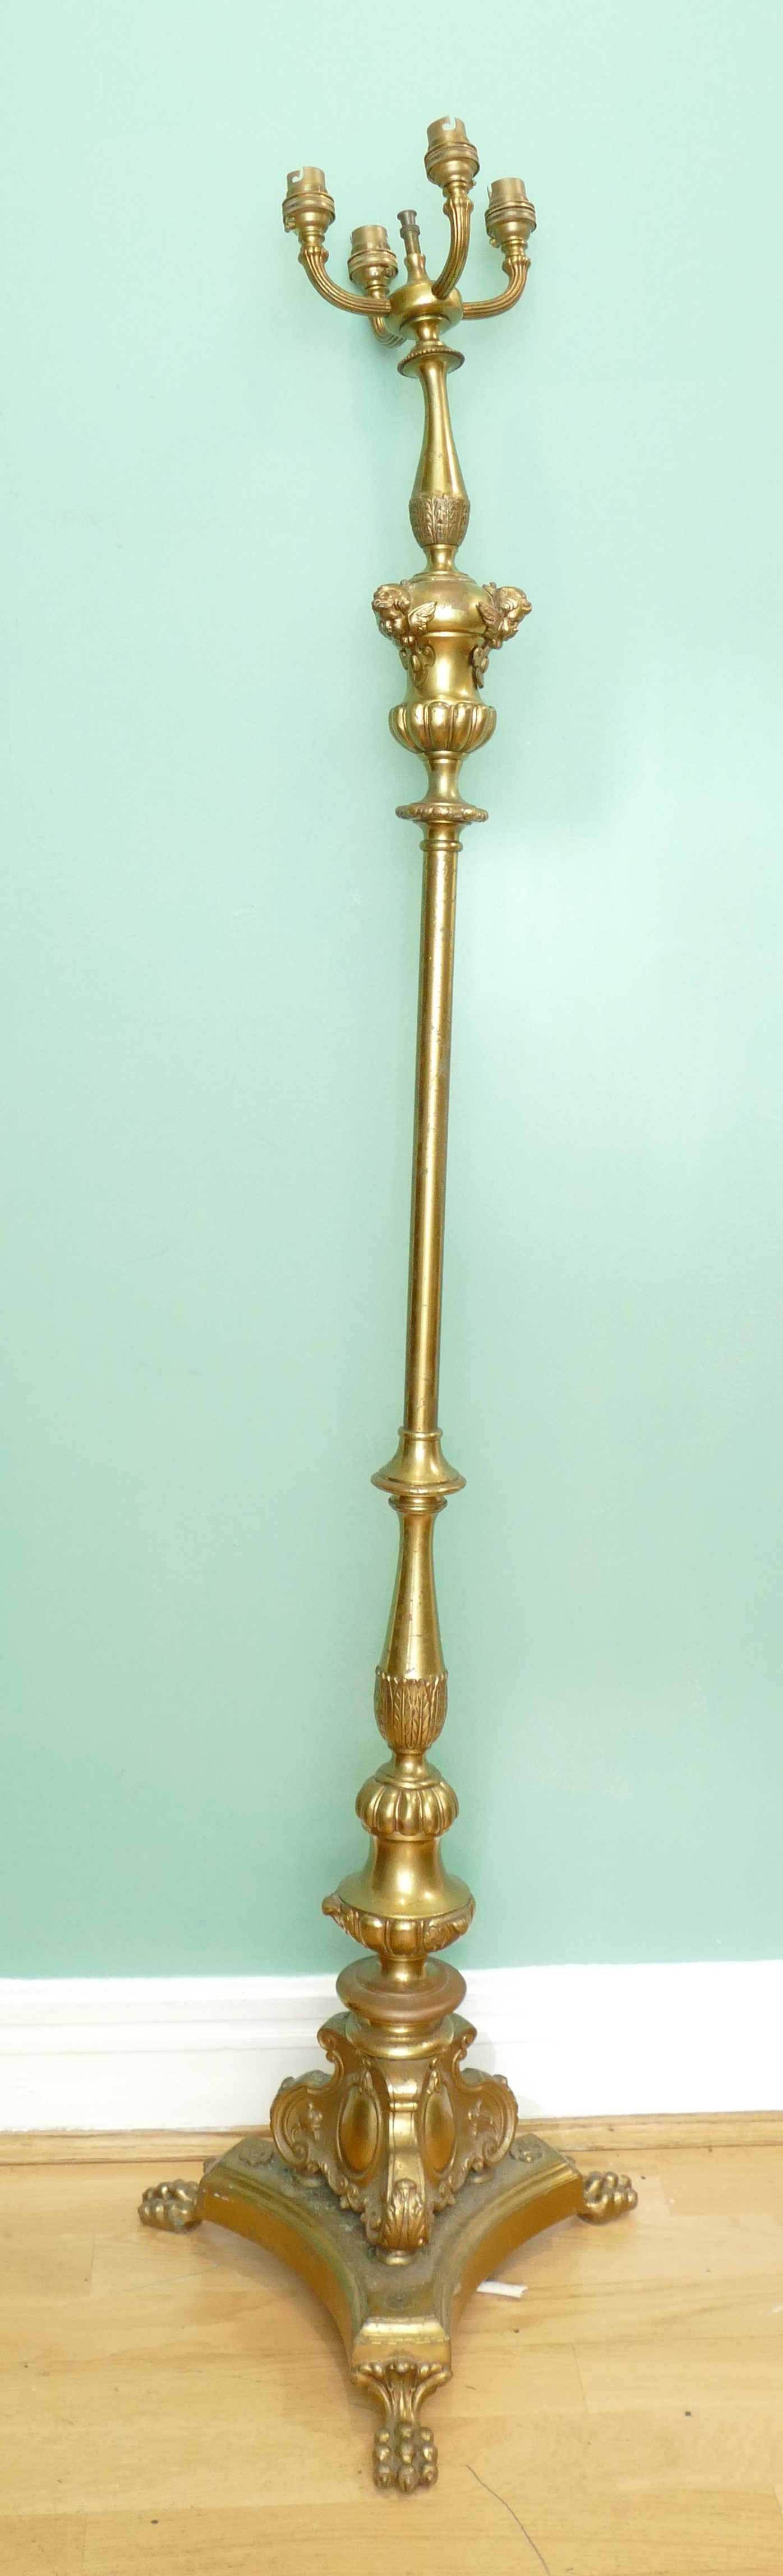 A Louis XV style gilt brass floor standing lamp, having four branch fittings, turned column with